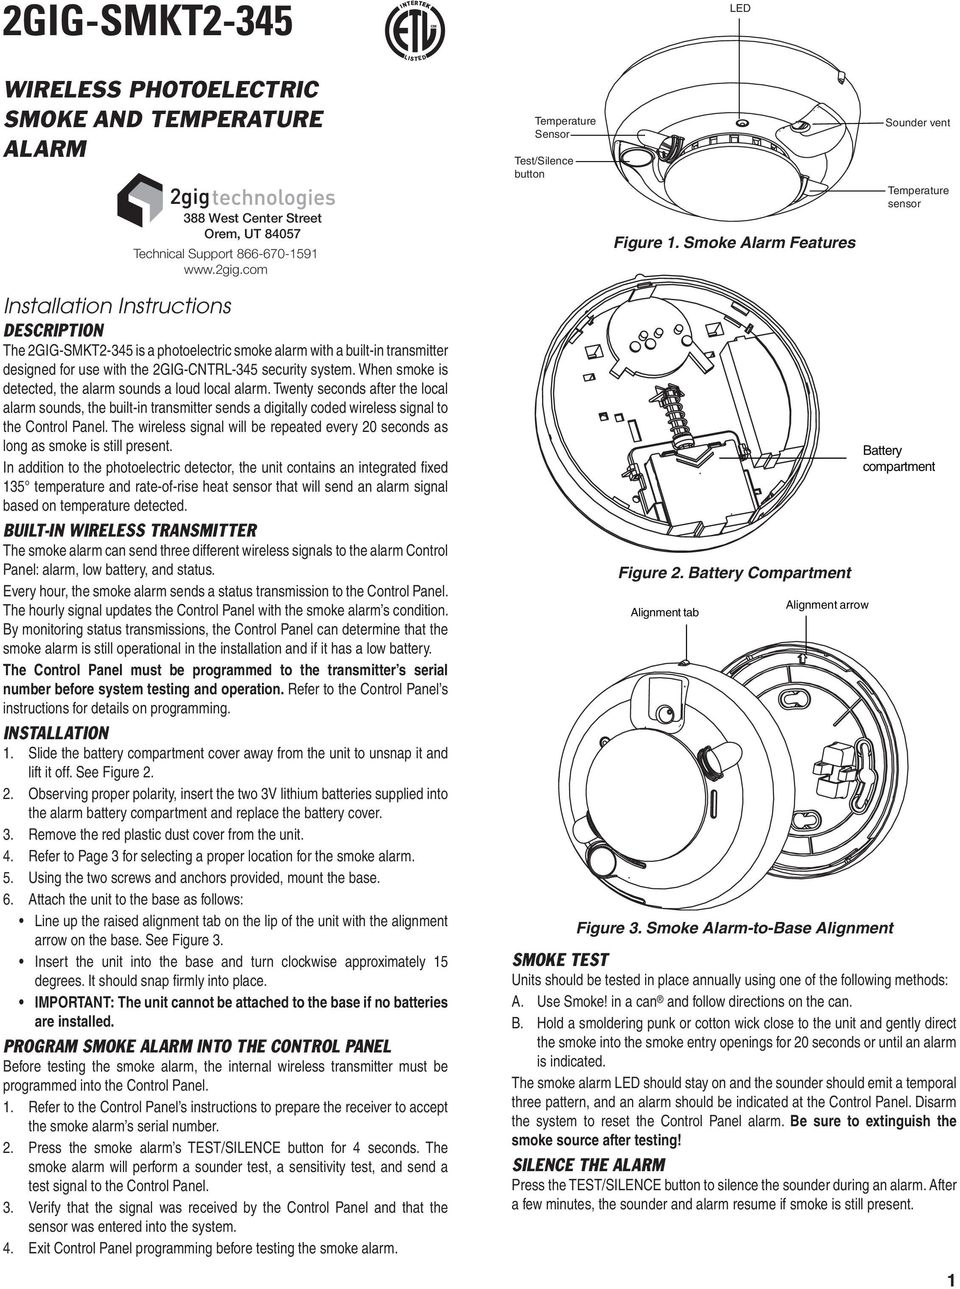 Smoke Alarm Features Sounder vent Temperature sensor Installation Instructions DESCRIPTION The 2GIG-SMKT2-345 is a photoelectric smoke alarm with a built-in transmitter designed for use with the